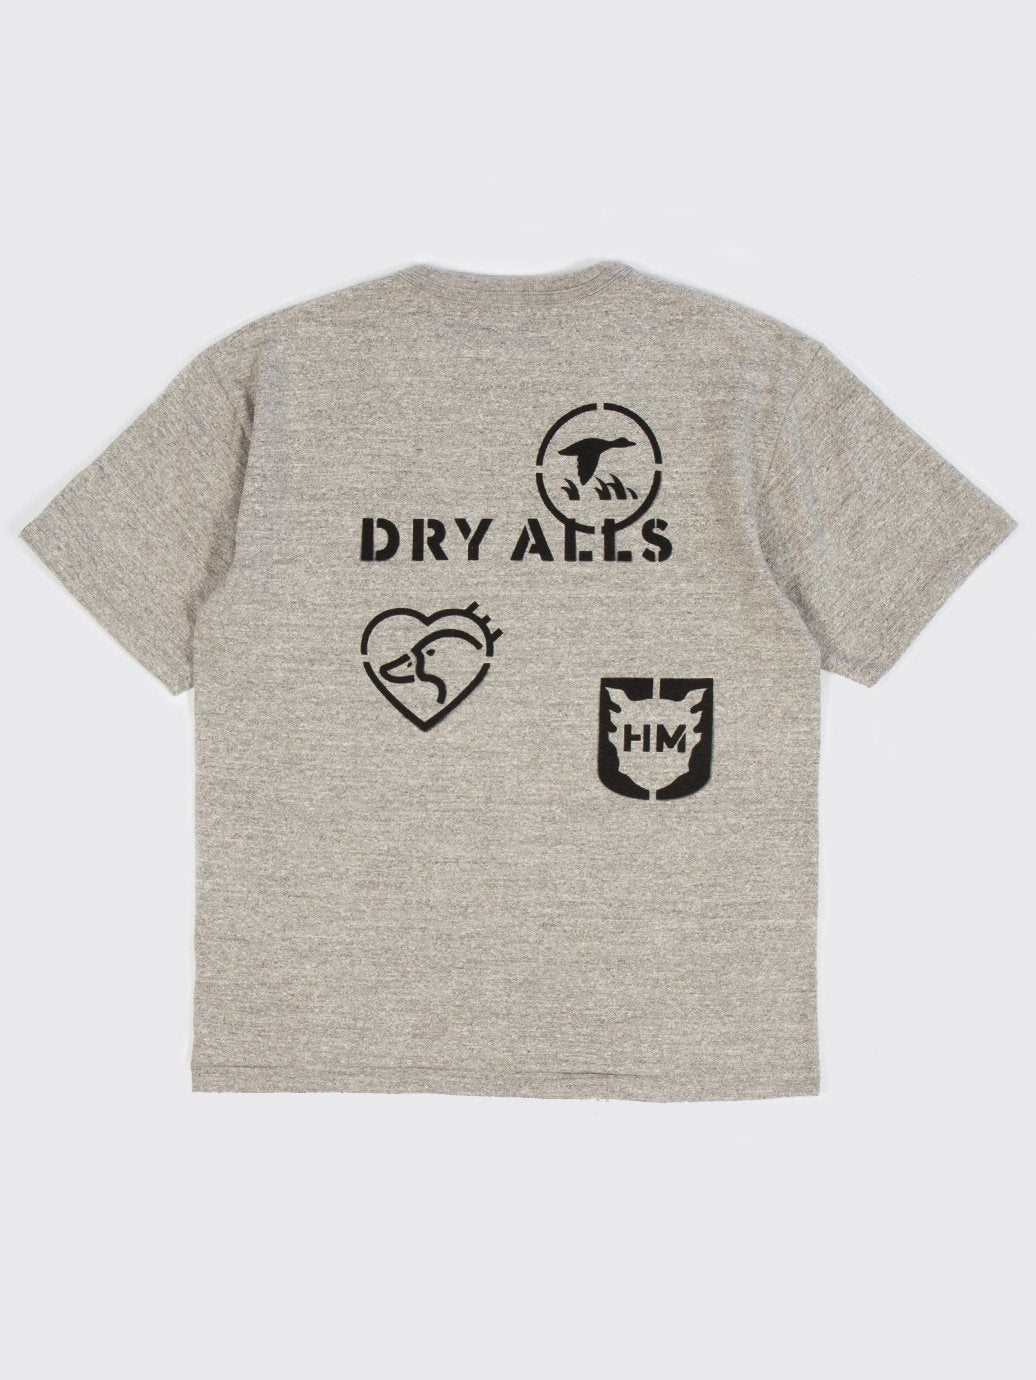 Human Made Dry Alls T-Shirt #2314 SS22 Grey – OALLERY